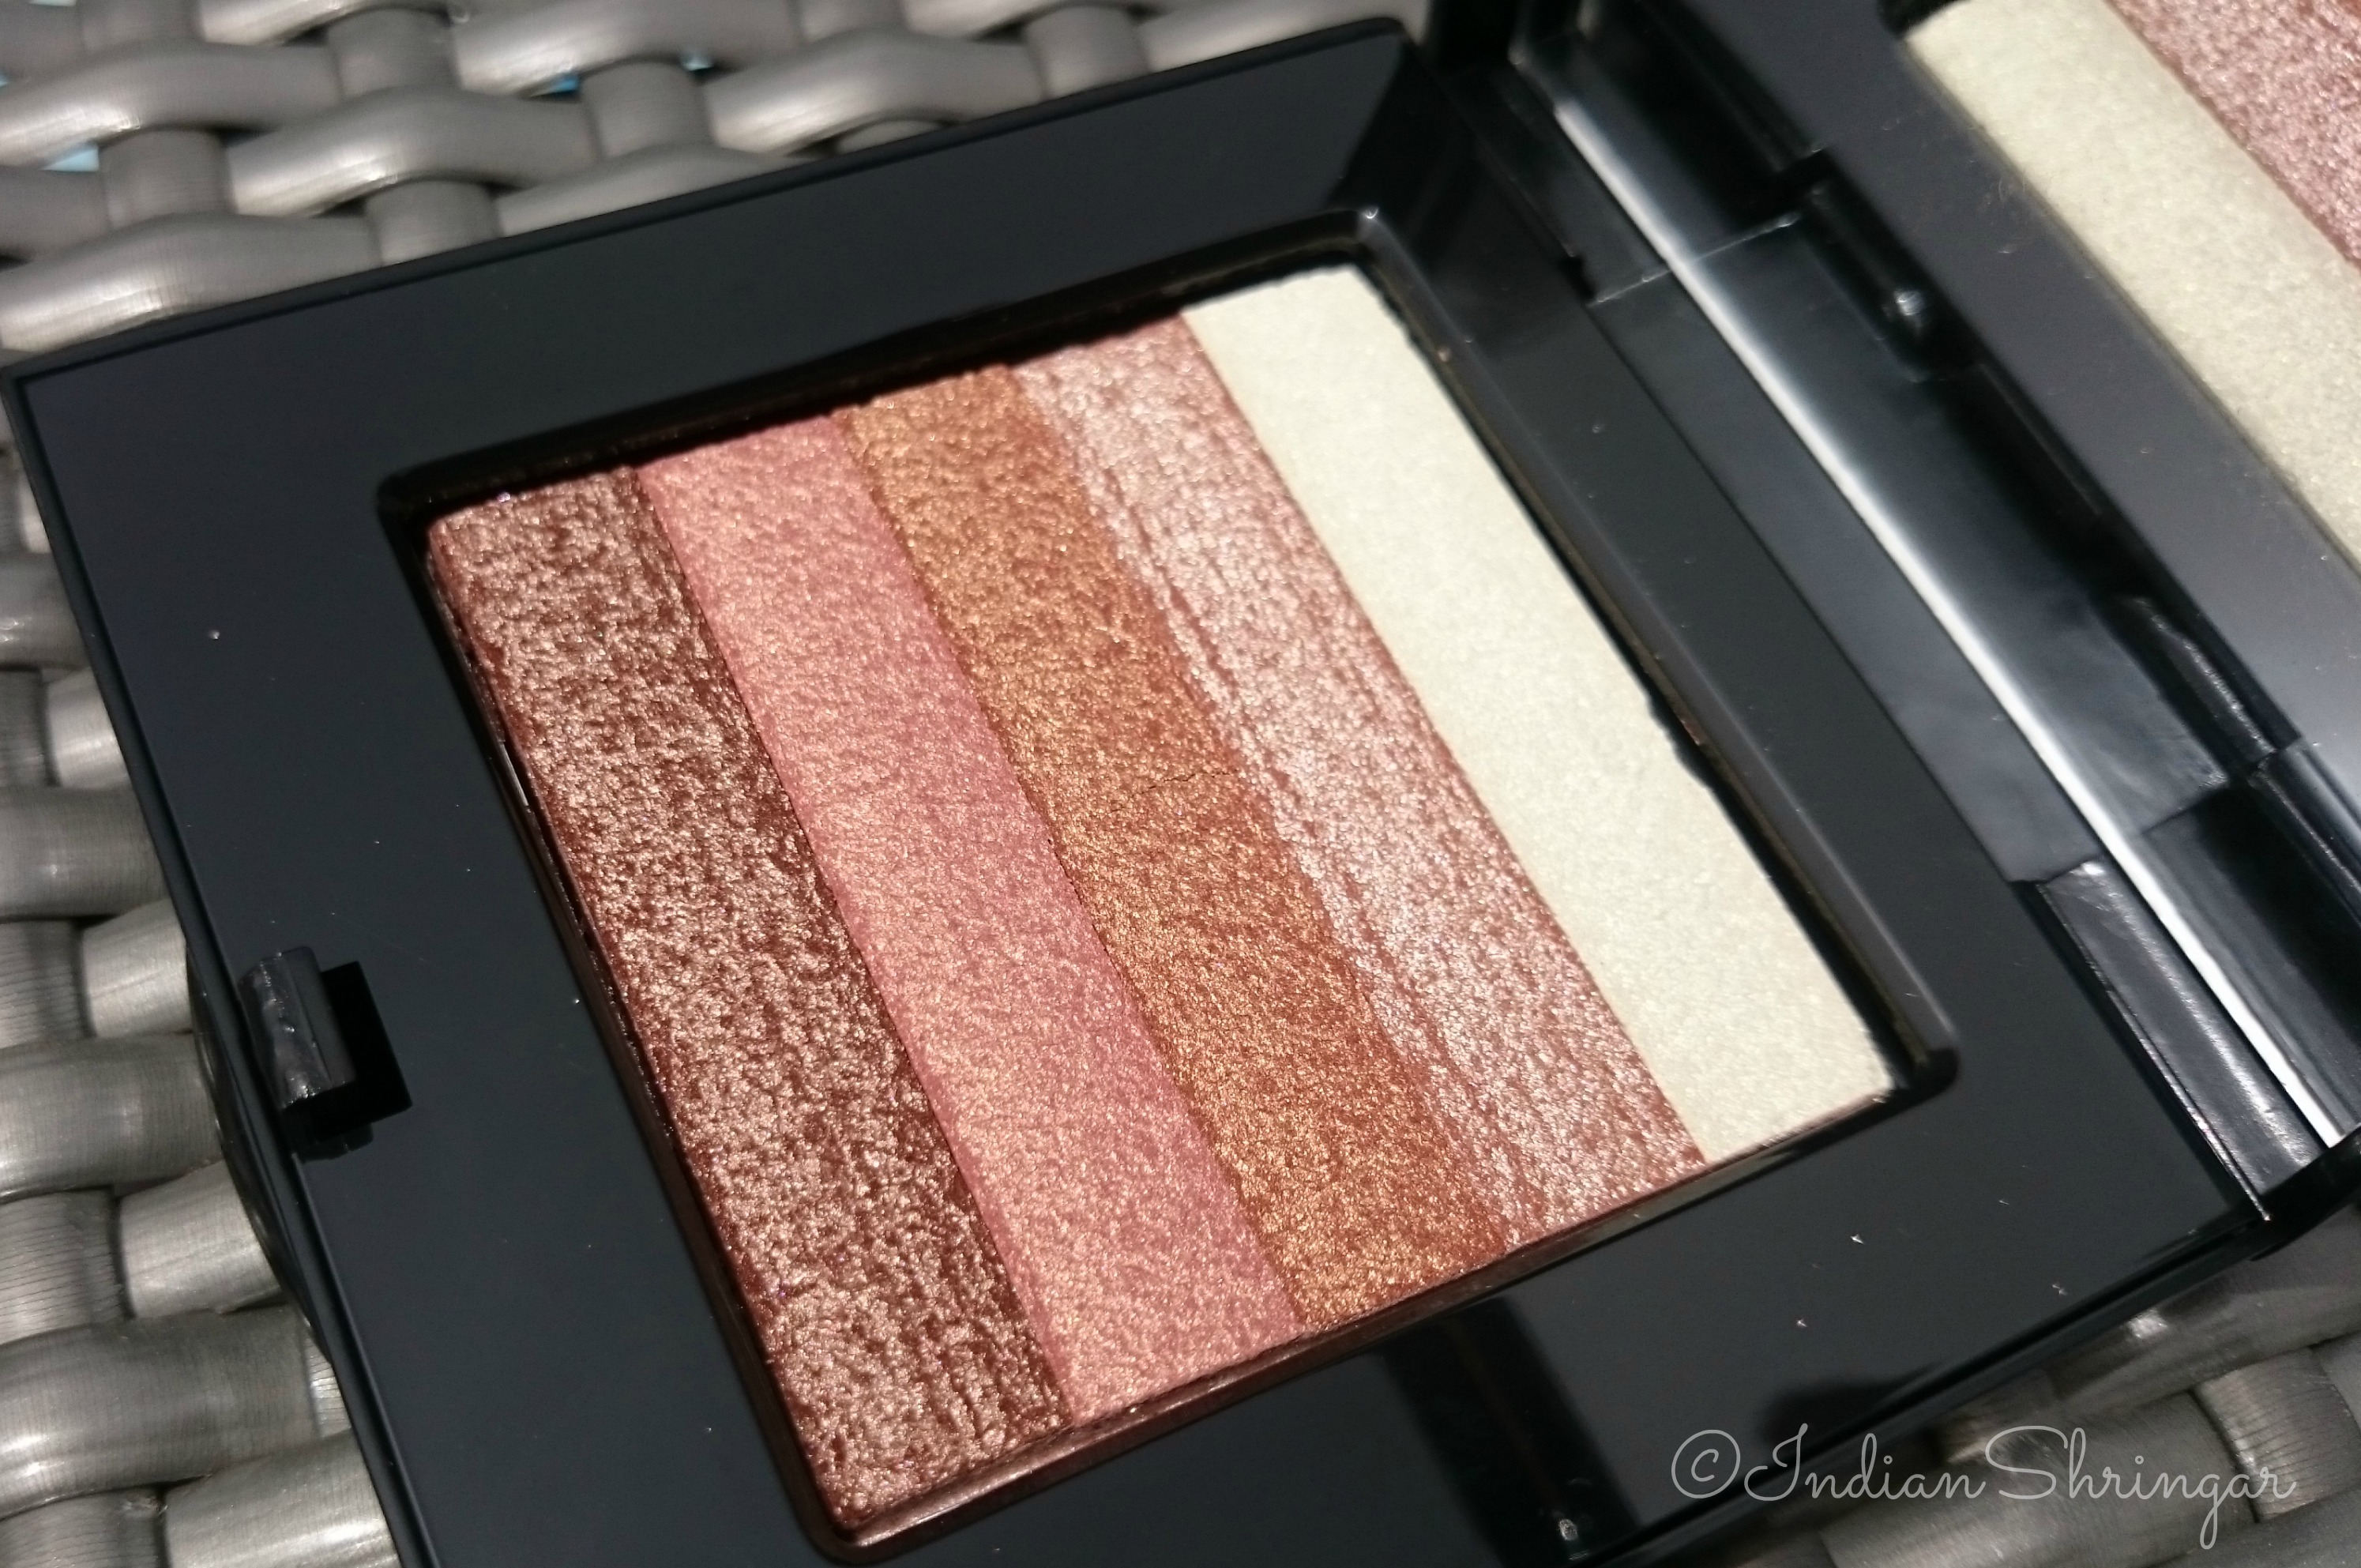 Bobbi Brown Shimmer Brick in Bronze - review, swatches and price in India.